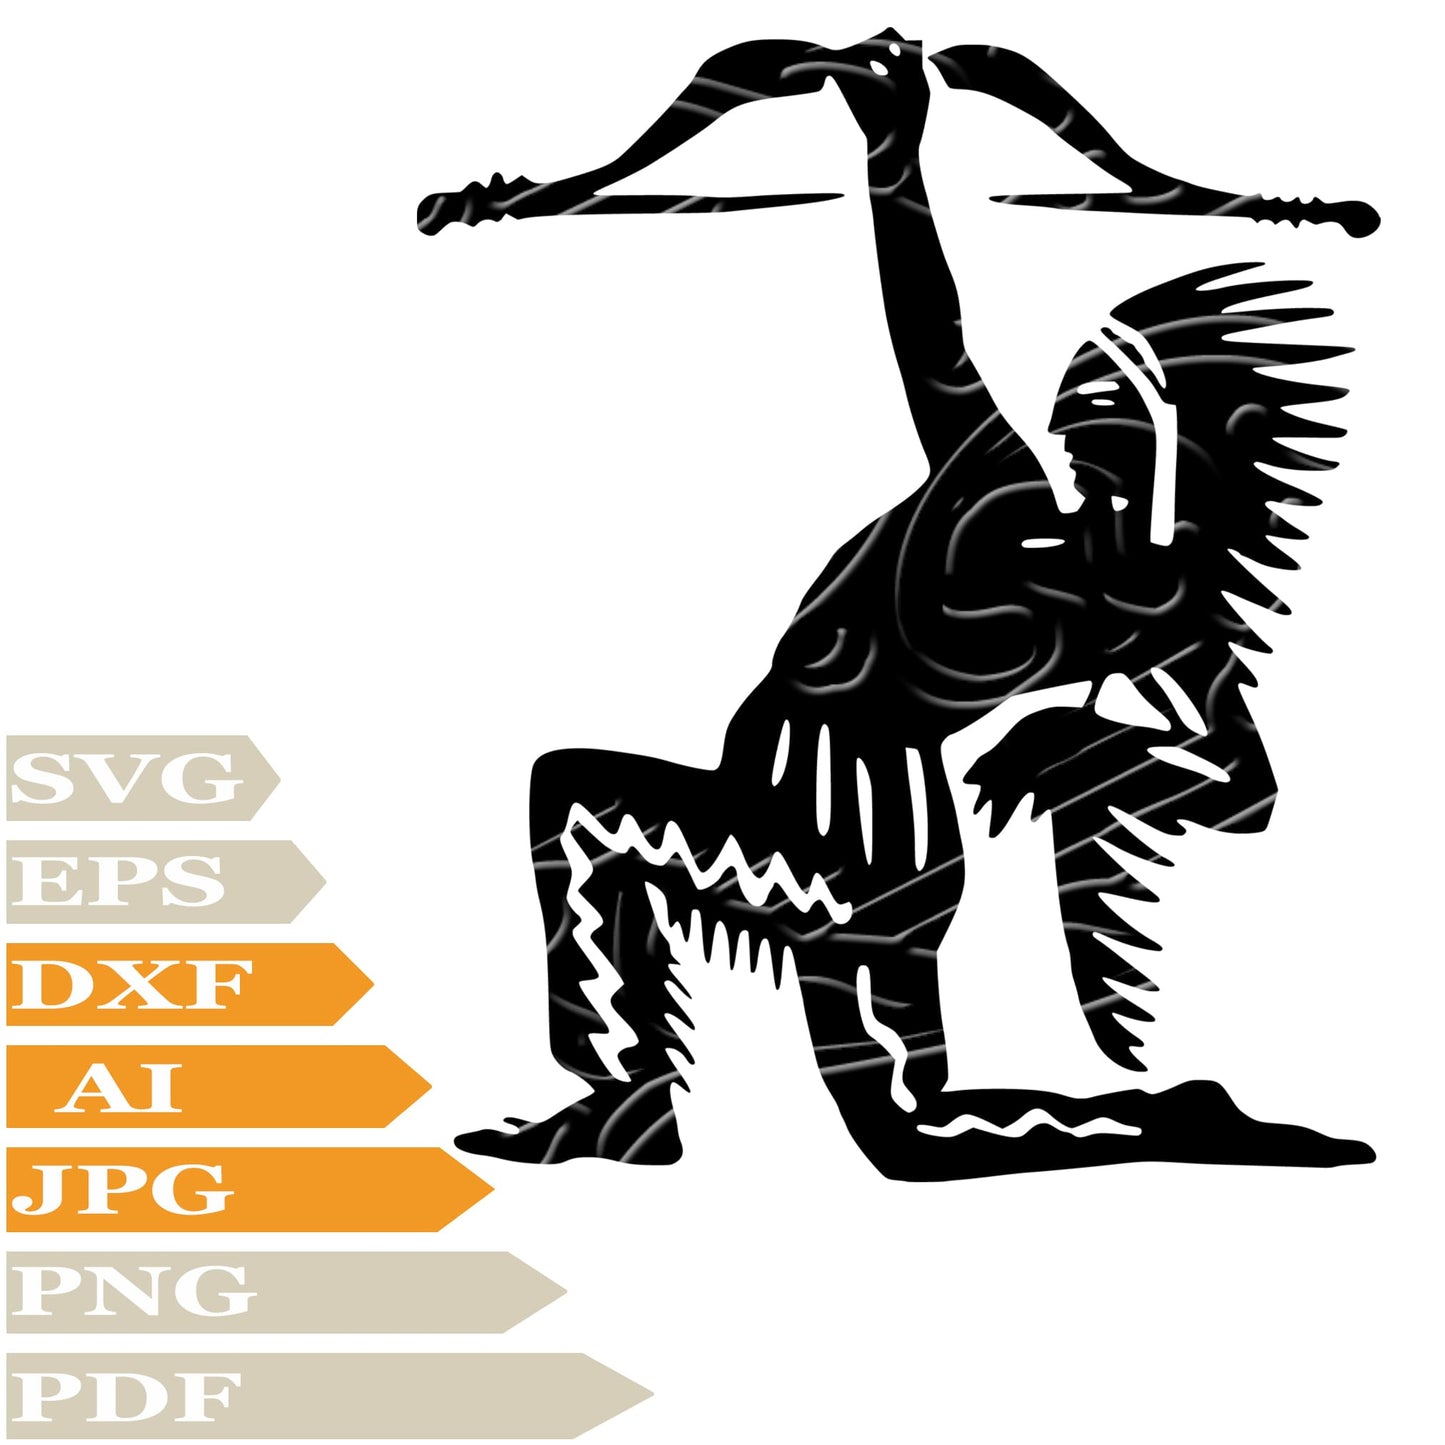 Native American Man, Native American Archer Svg File, Image Cut, Png, For Tattoo, Silhouette, Digital Vector Download, Cut File, Clipart, For Cricut